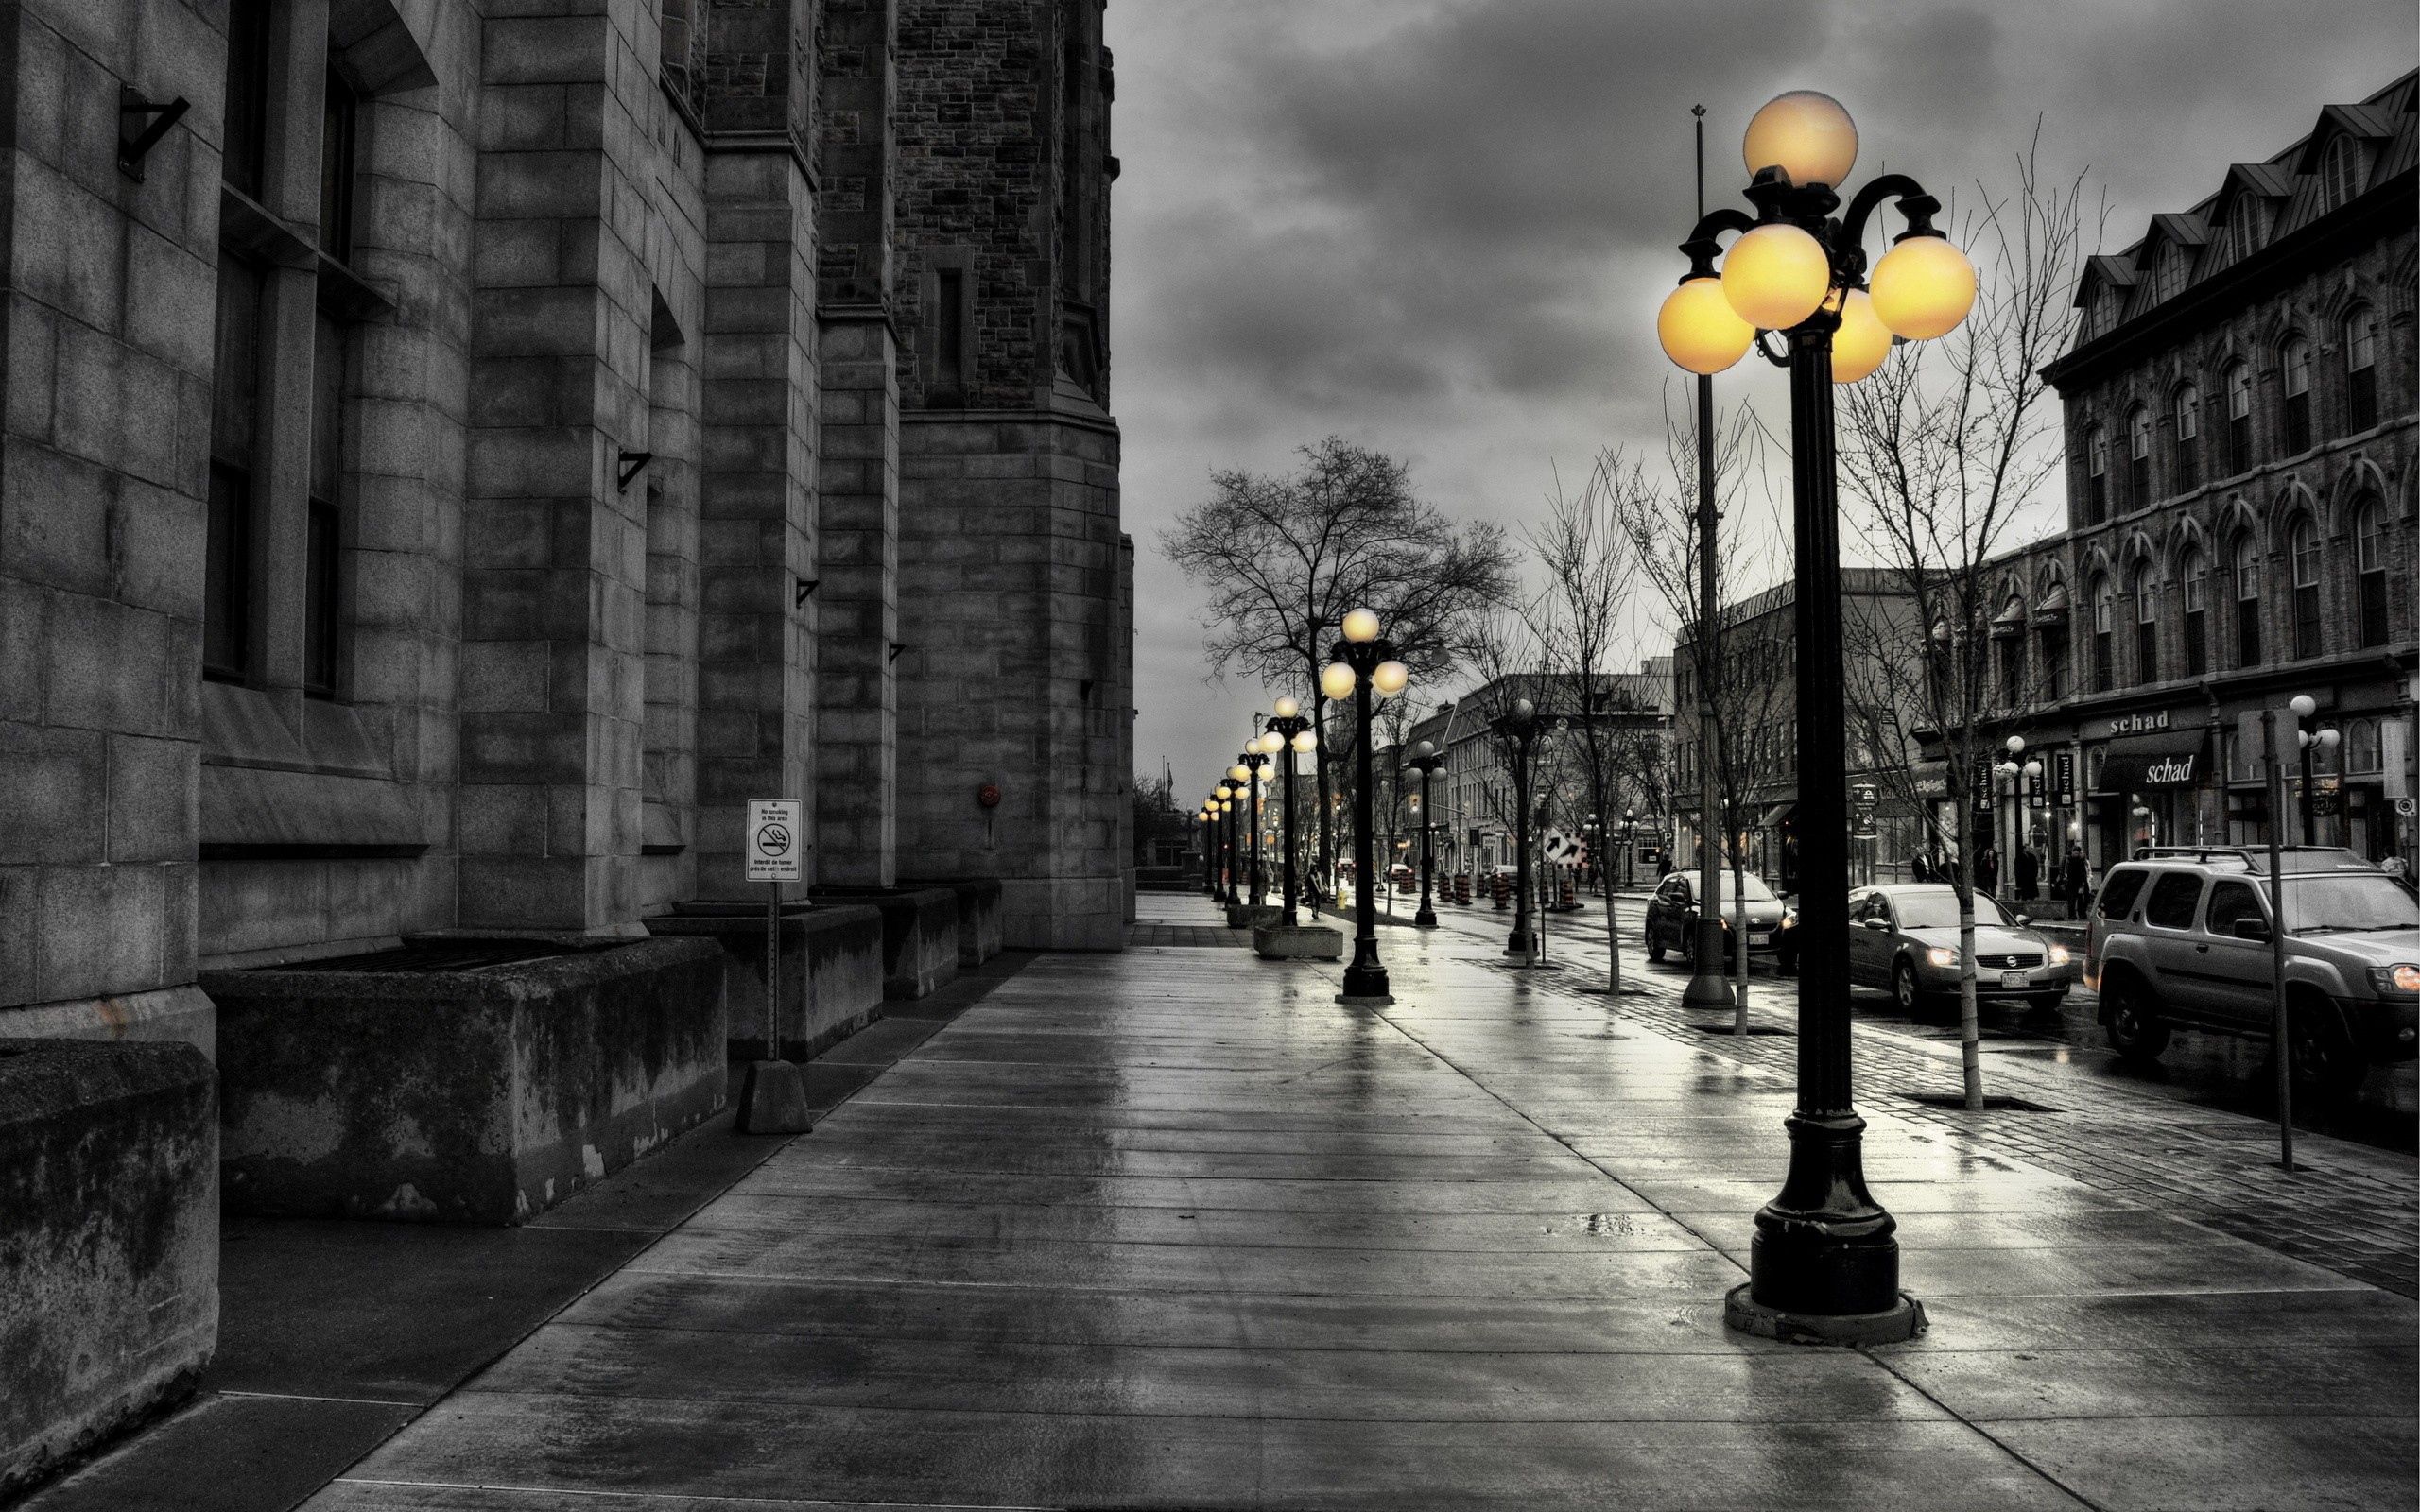 cities, city, building, lights, lanterns, evening, bw, chb, hdr, street High Definition image